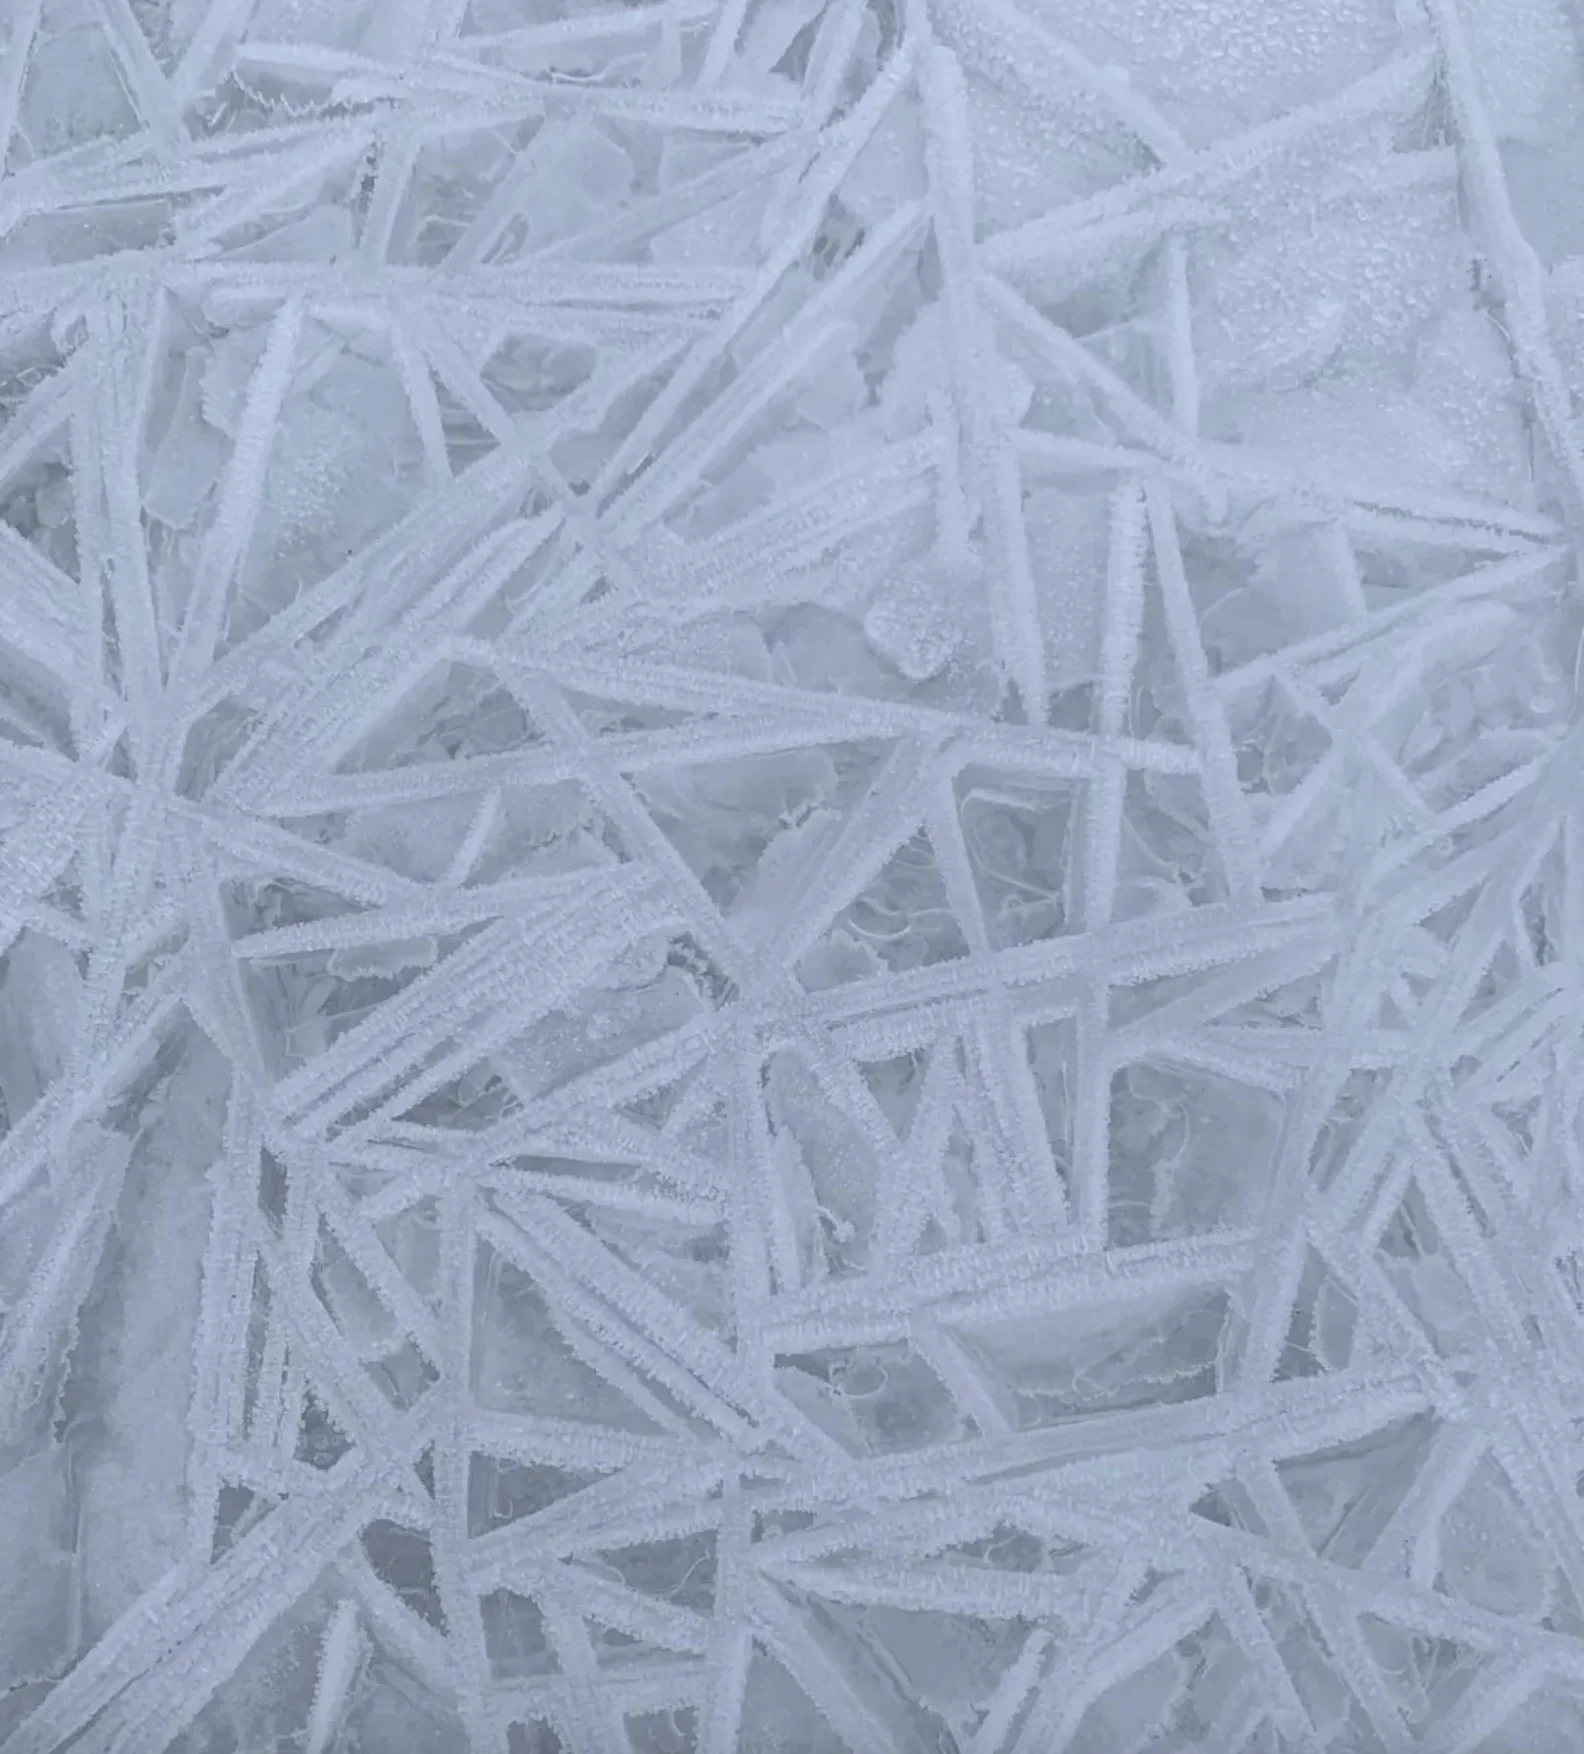 CBC: Kavanaugh said the stick-like formations happen in calm conditions when supercooled water molecules arrange themselves into crystals that tend to grow like needles. (Submitted by Peter Hofbauer)